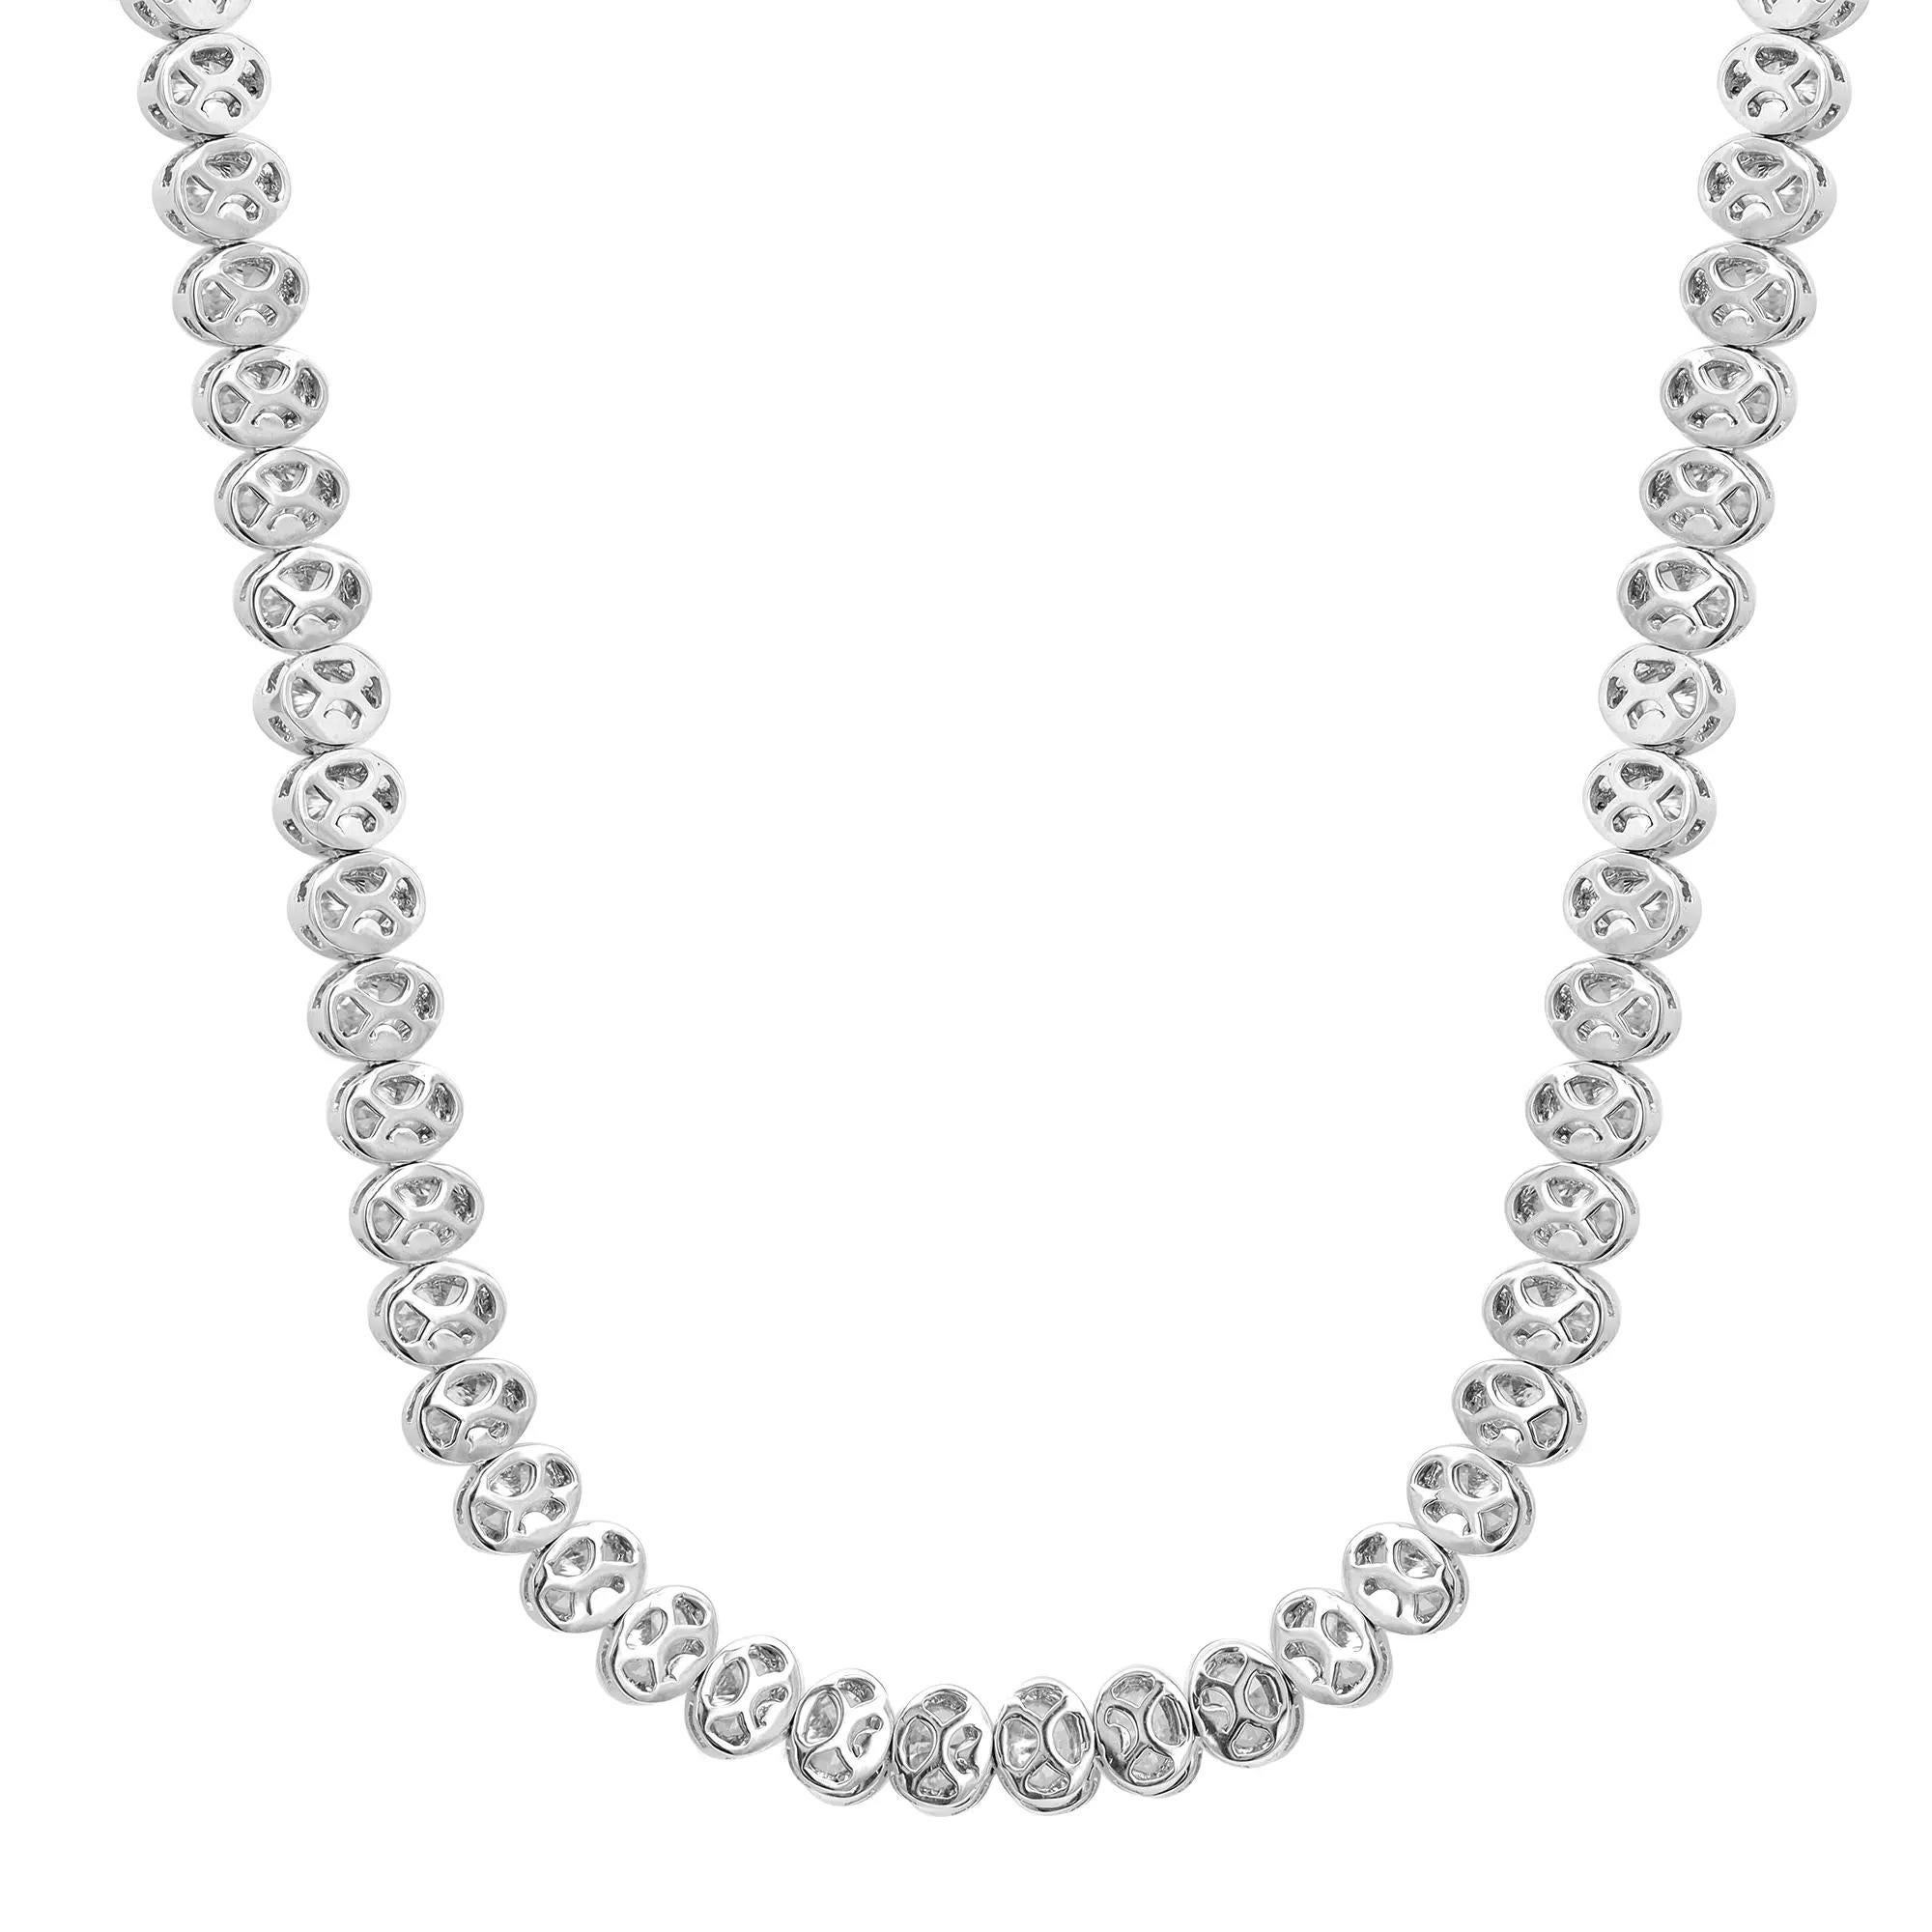 Modern Bezel Set Oval Cut Diamond Tennis Necklace 18K White Gold 7.94Cttw 17 Inches For Sale